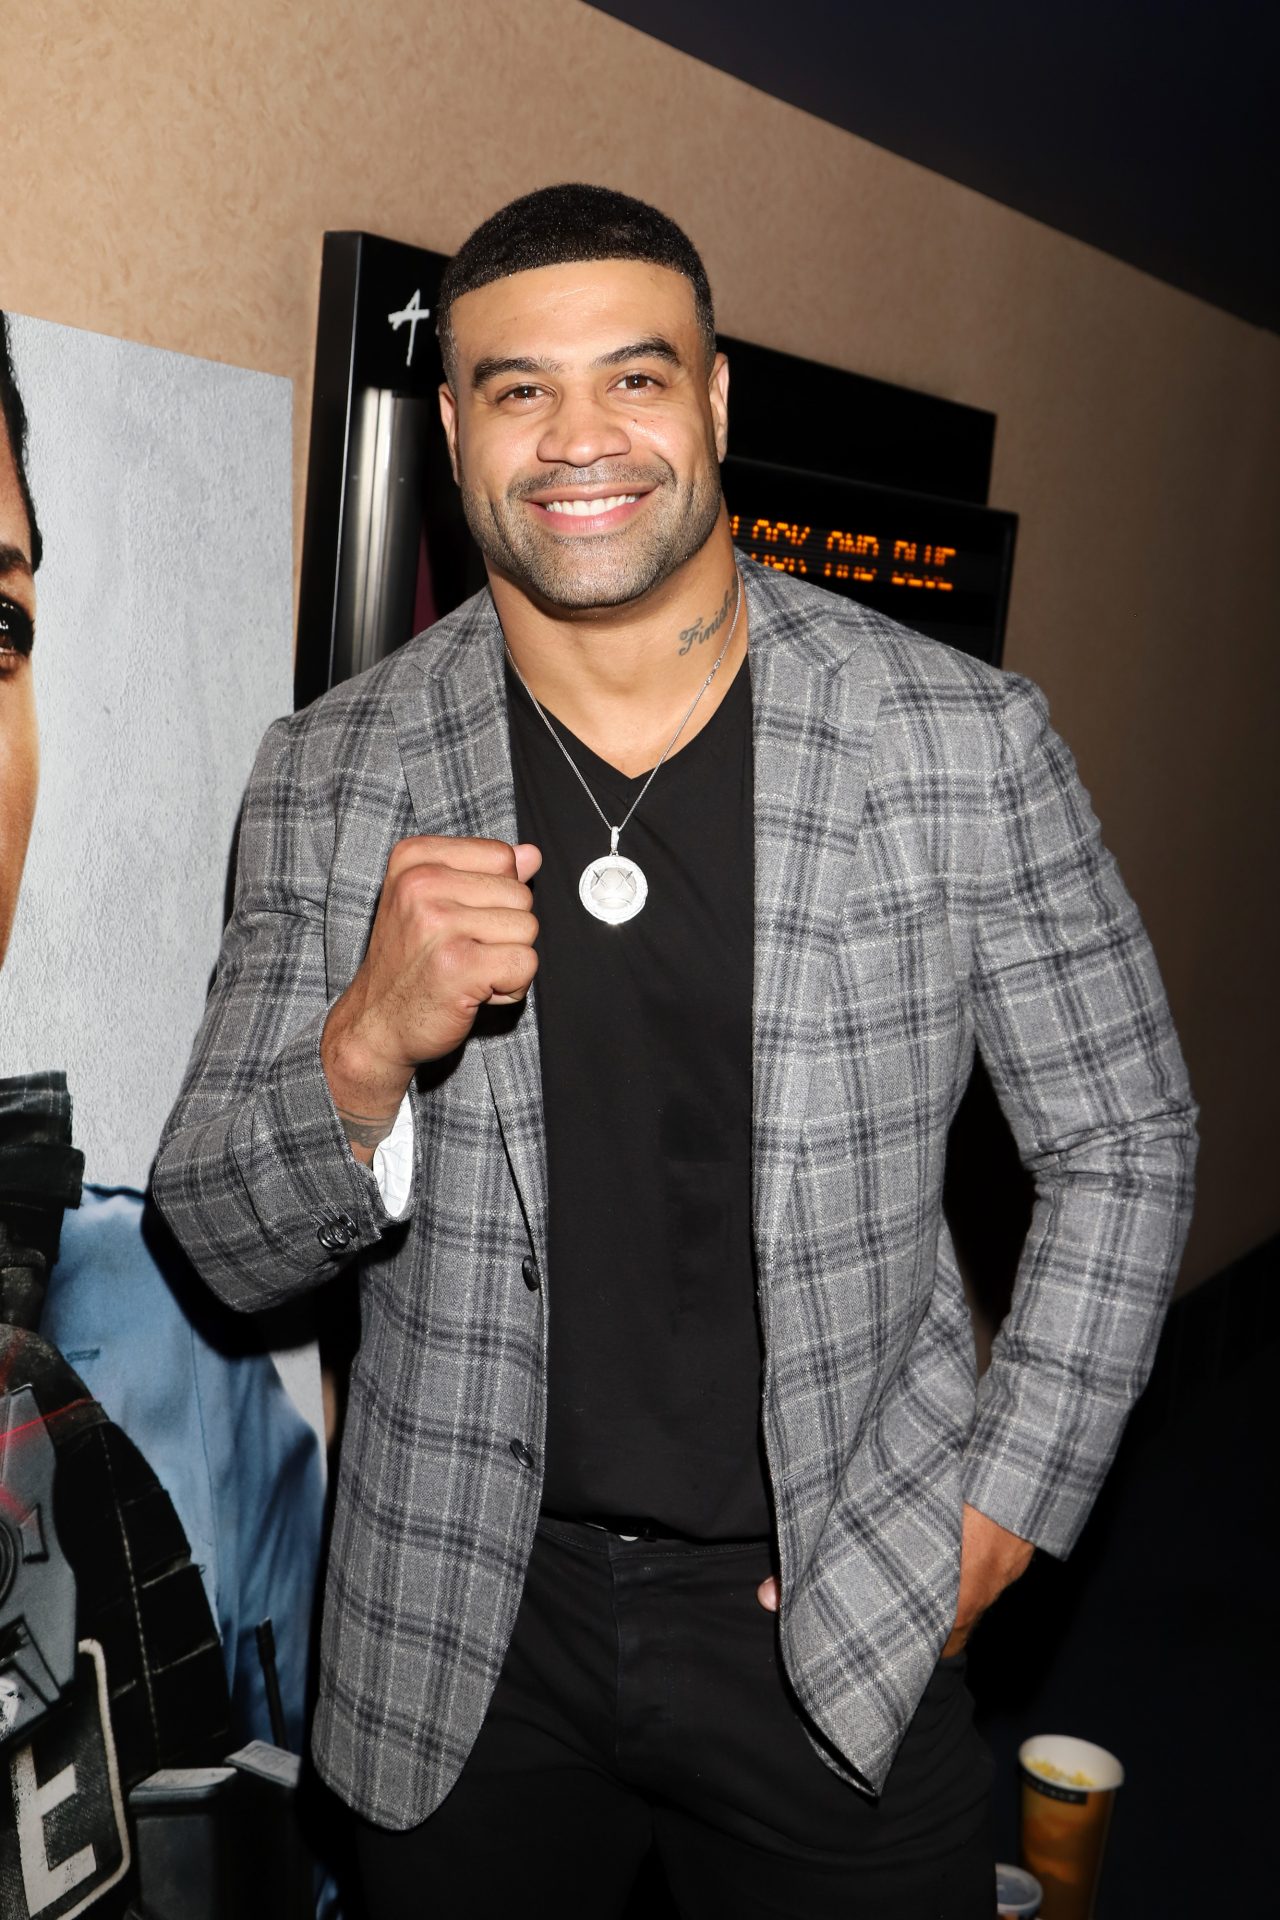 Shawne Merriman: From the NFL Gridiron to the MMA cage